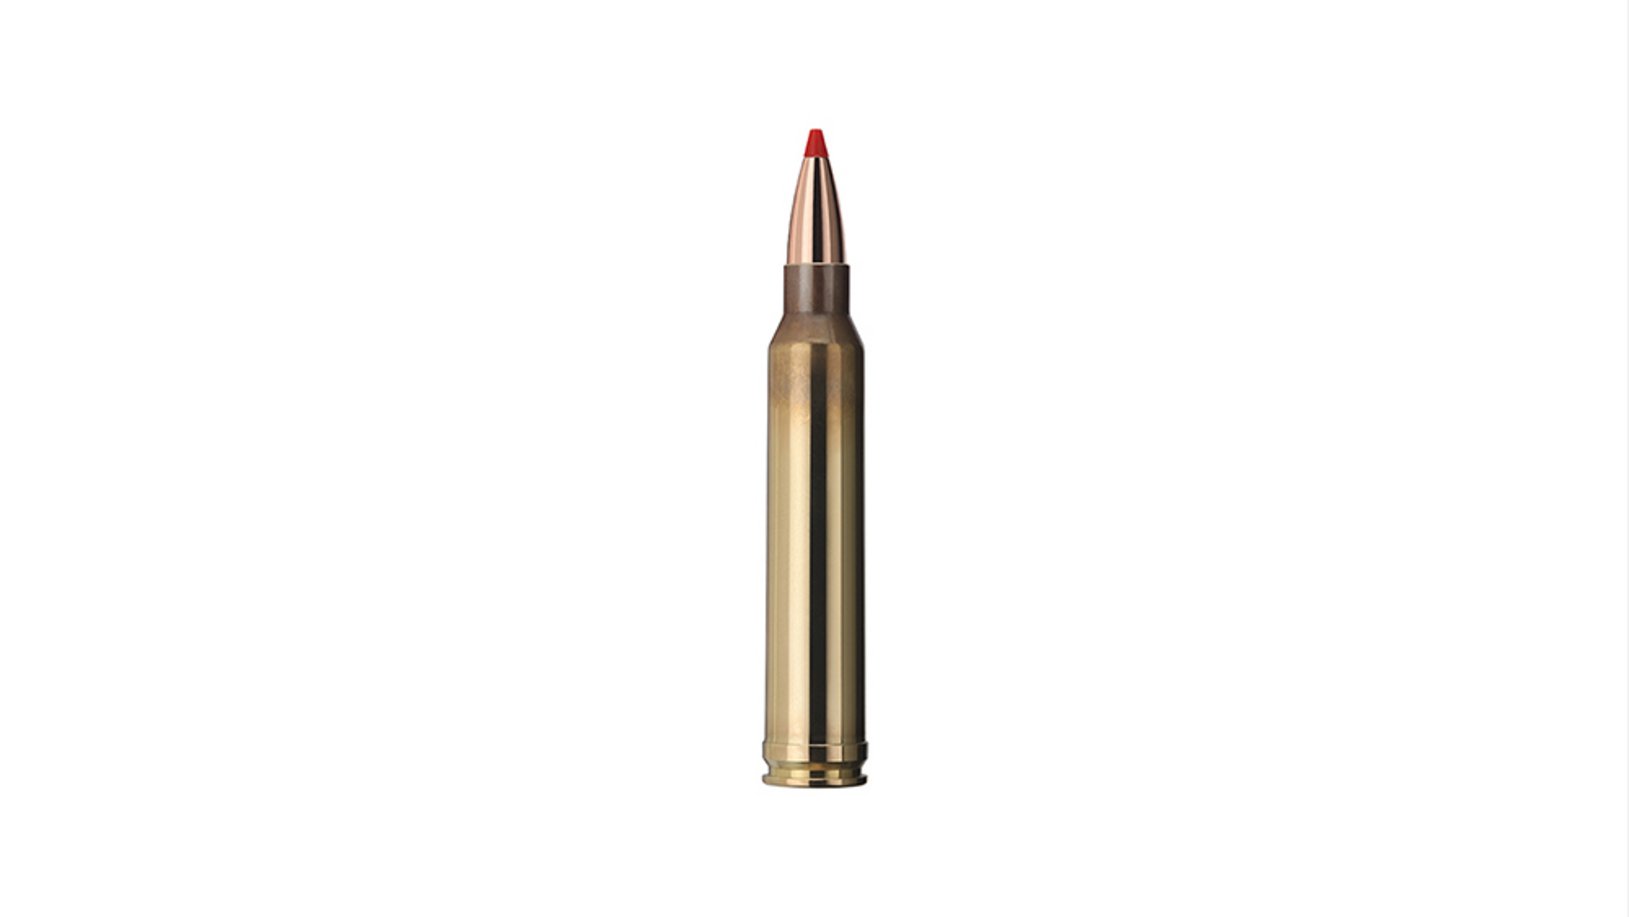 20 Munitions GECO Star cal 300 Win Mag 165gr